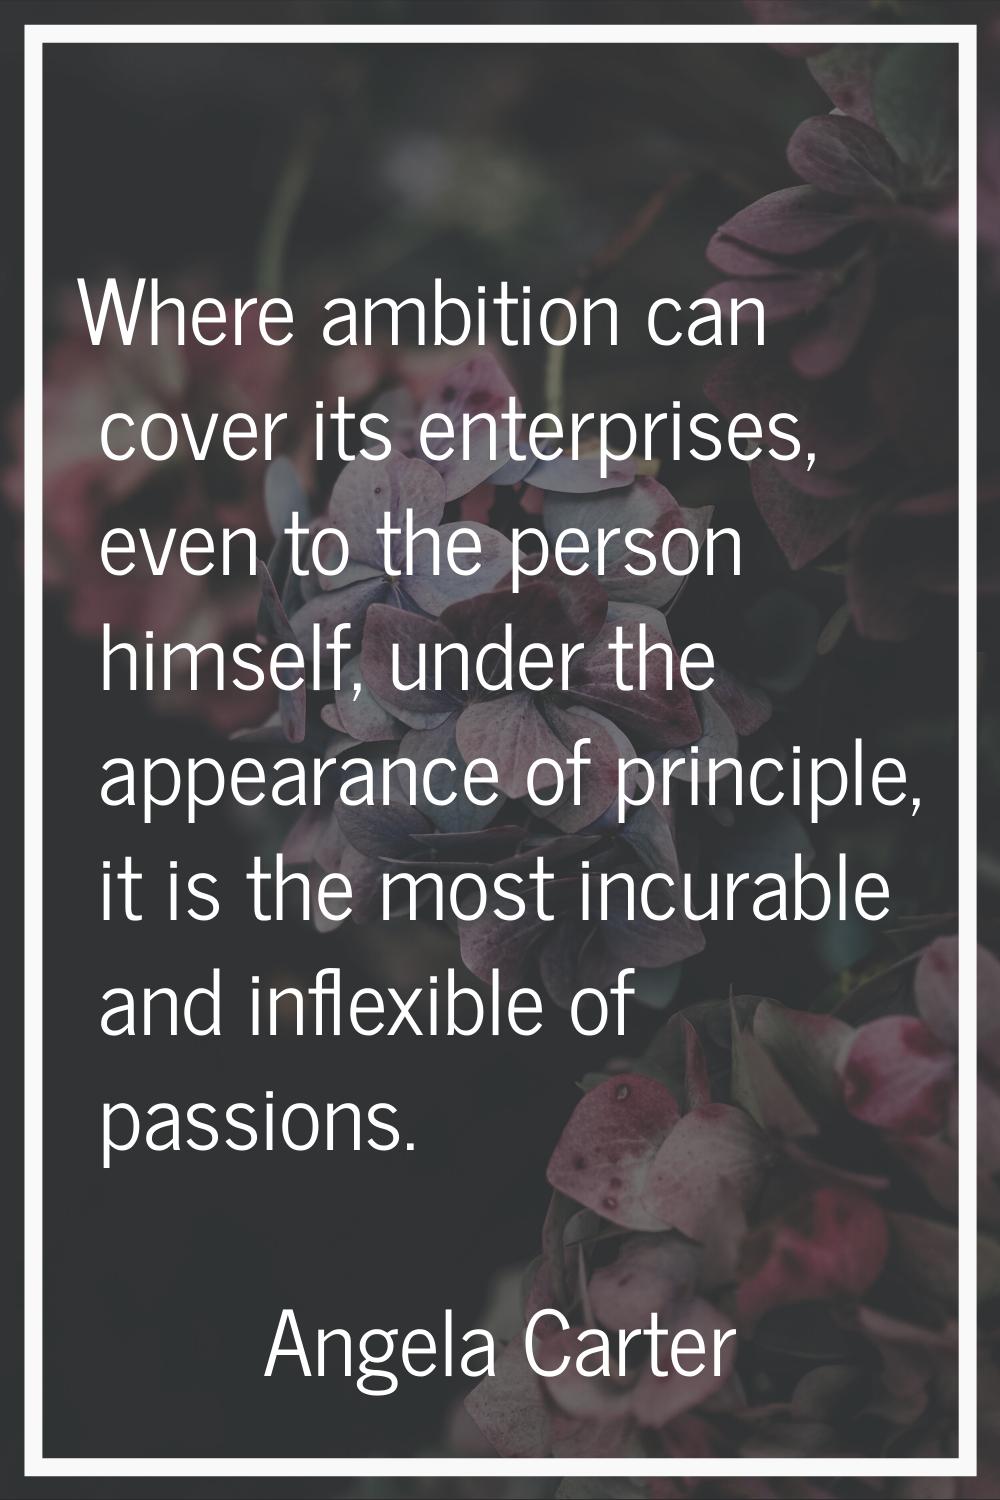 Where ambition can cover its enterprises, even to the person himself, under the appearance of princ